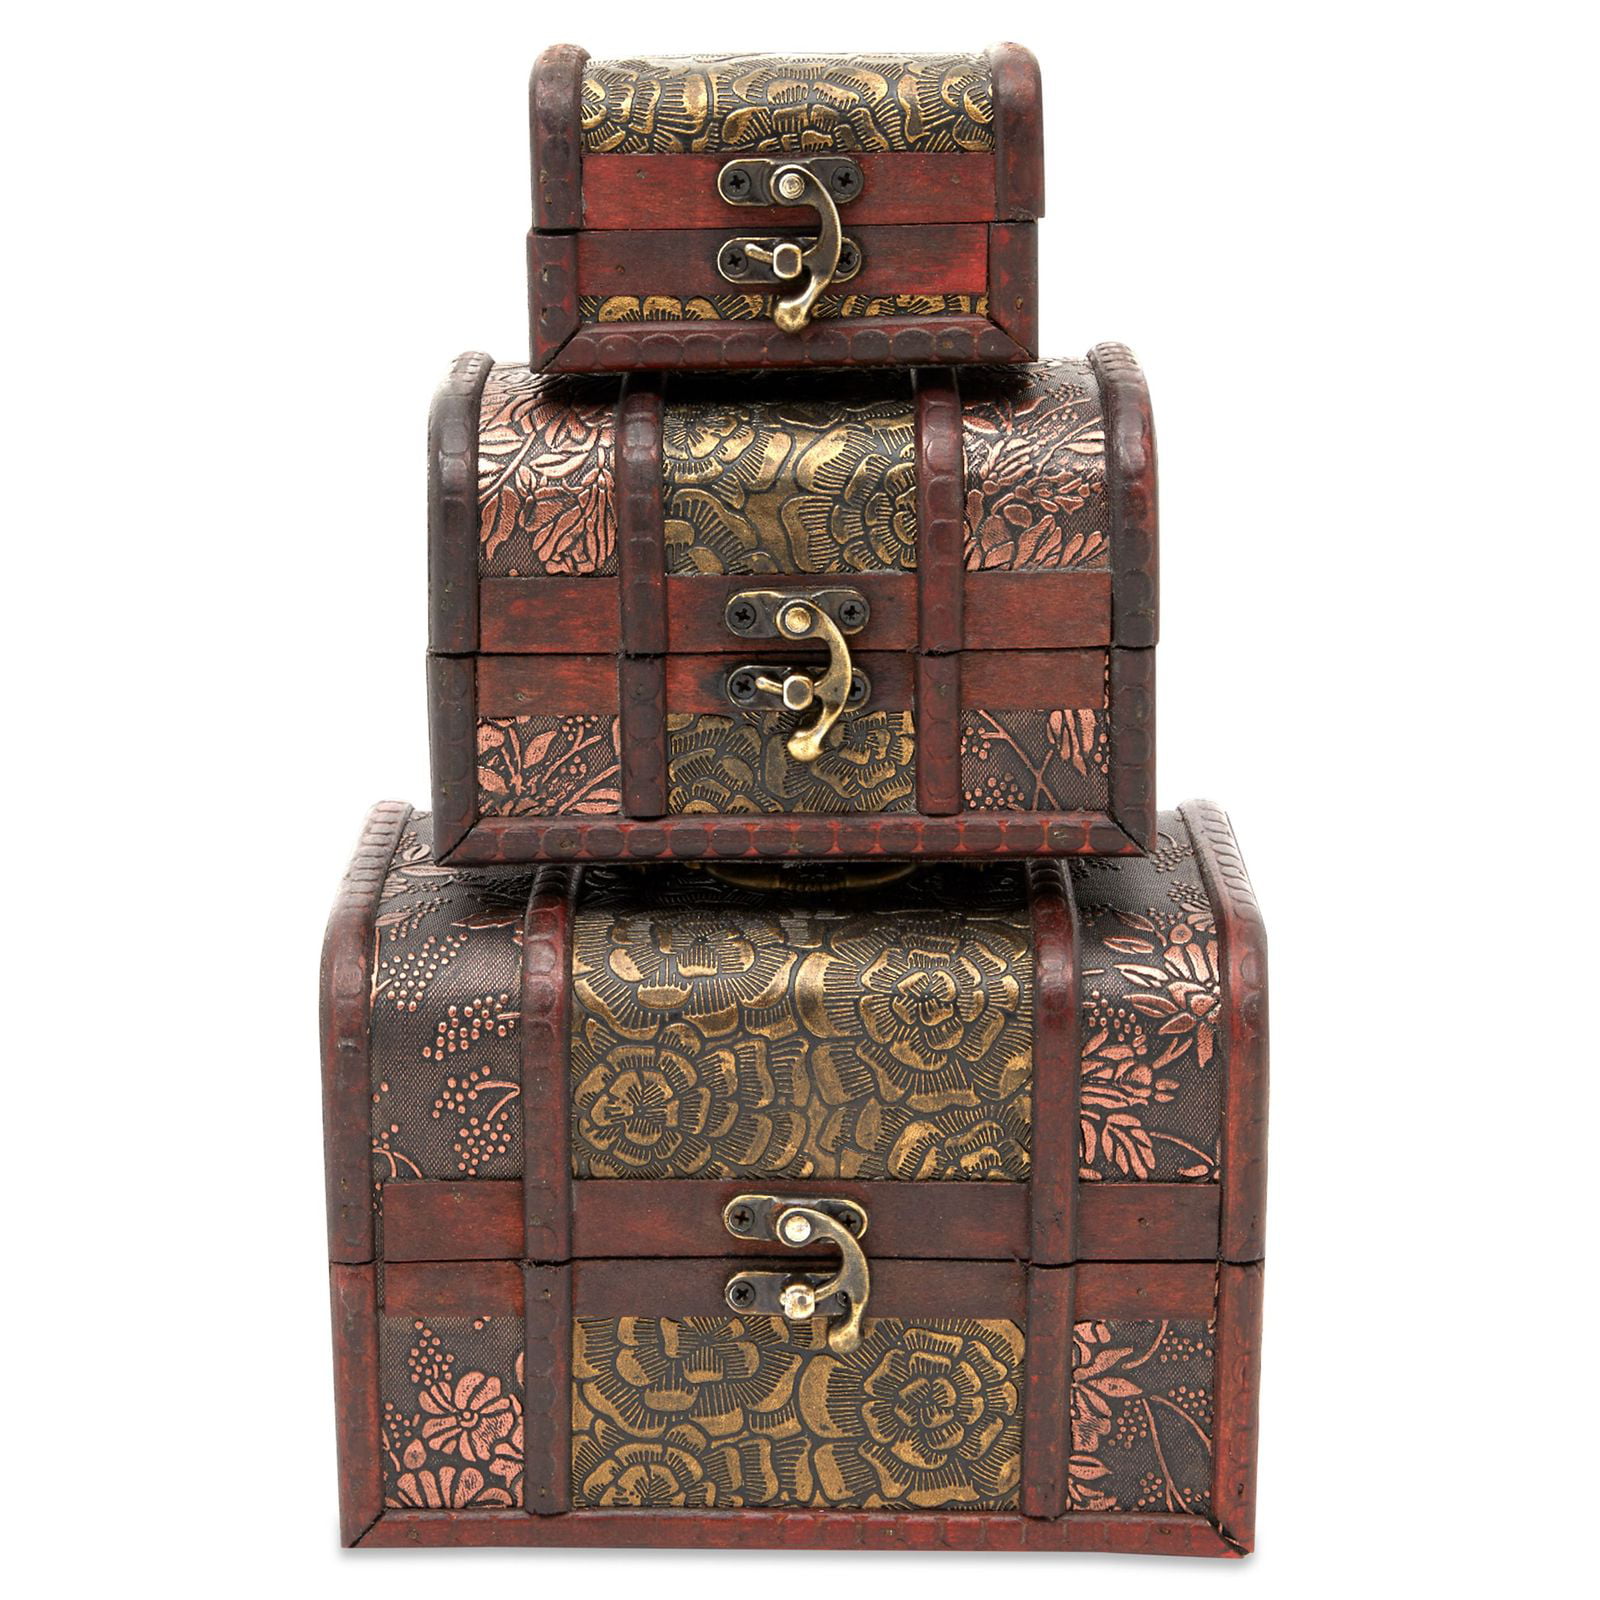 Med - All Wood Pirate Treasure Chest 11.5" Handcrafted Walnut or Mahogany 